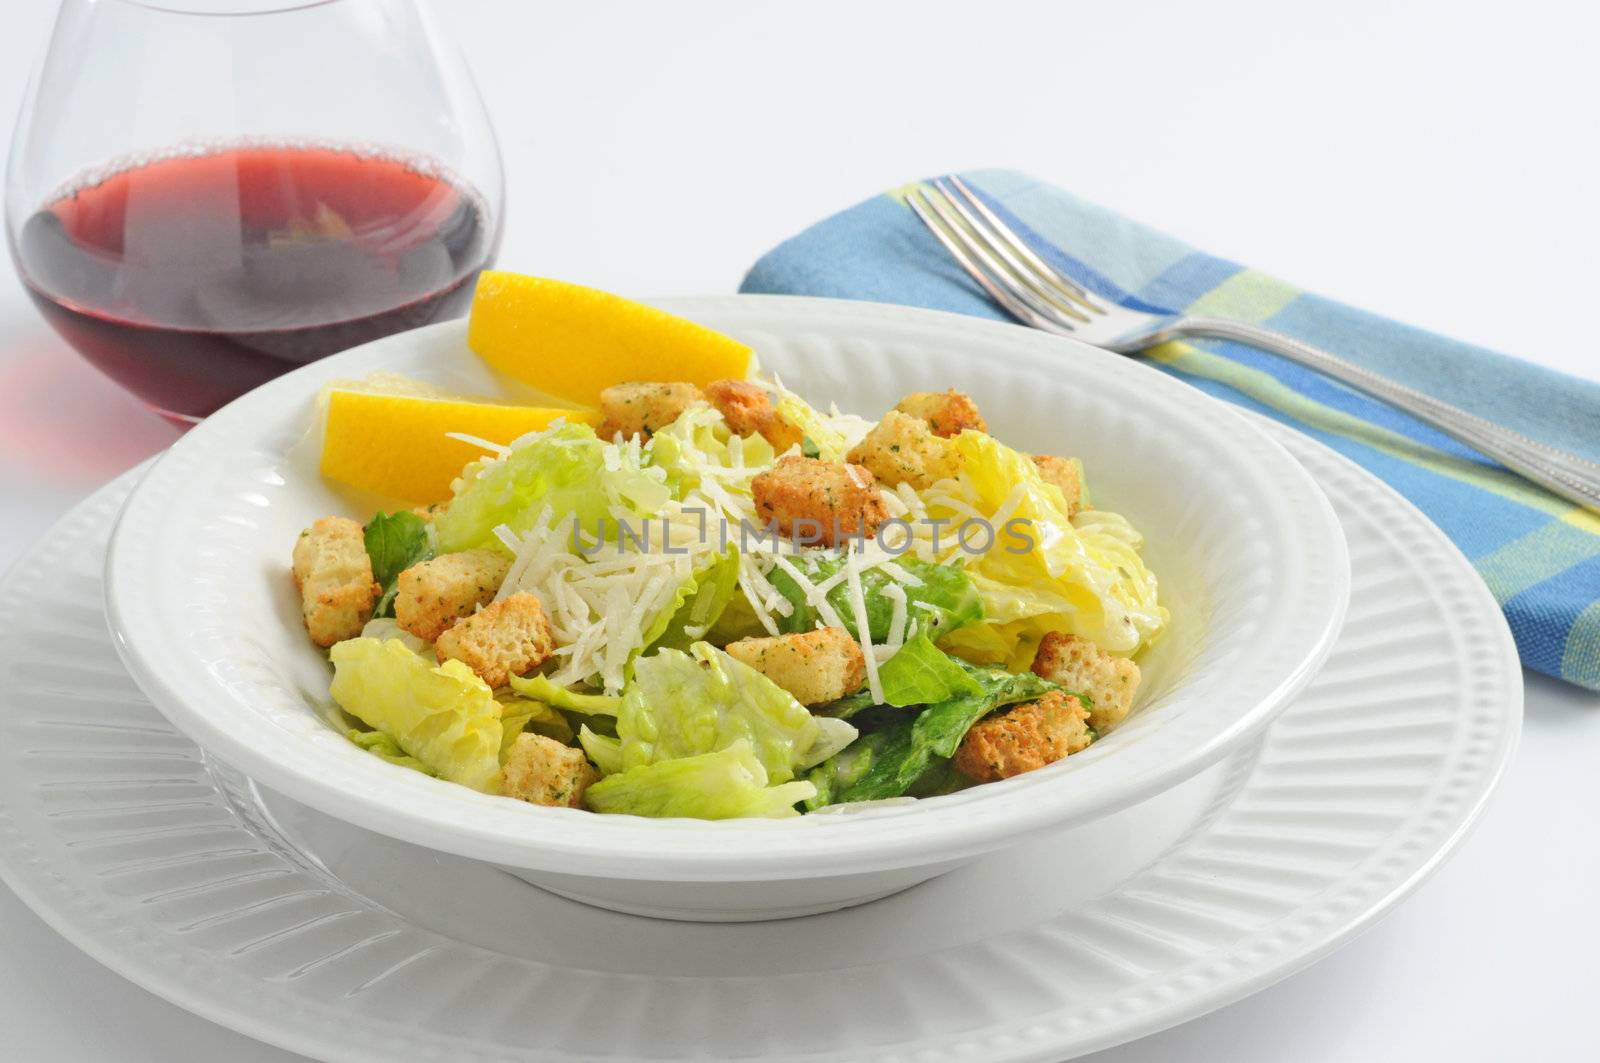 Delicious caesar salad served with red wine.